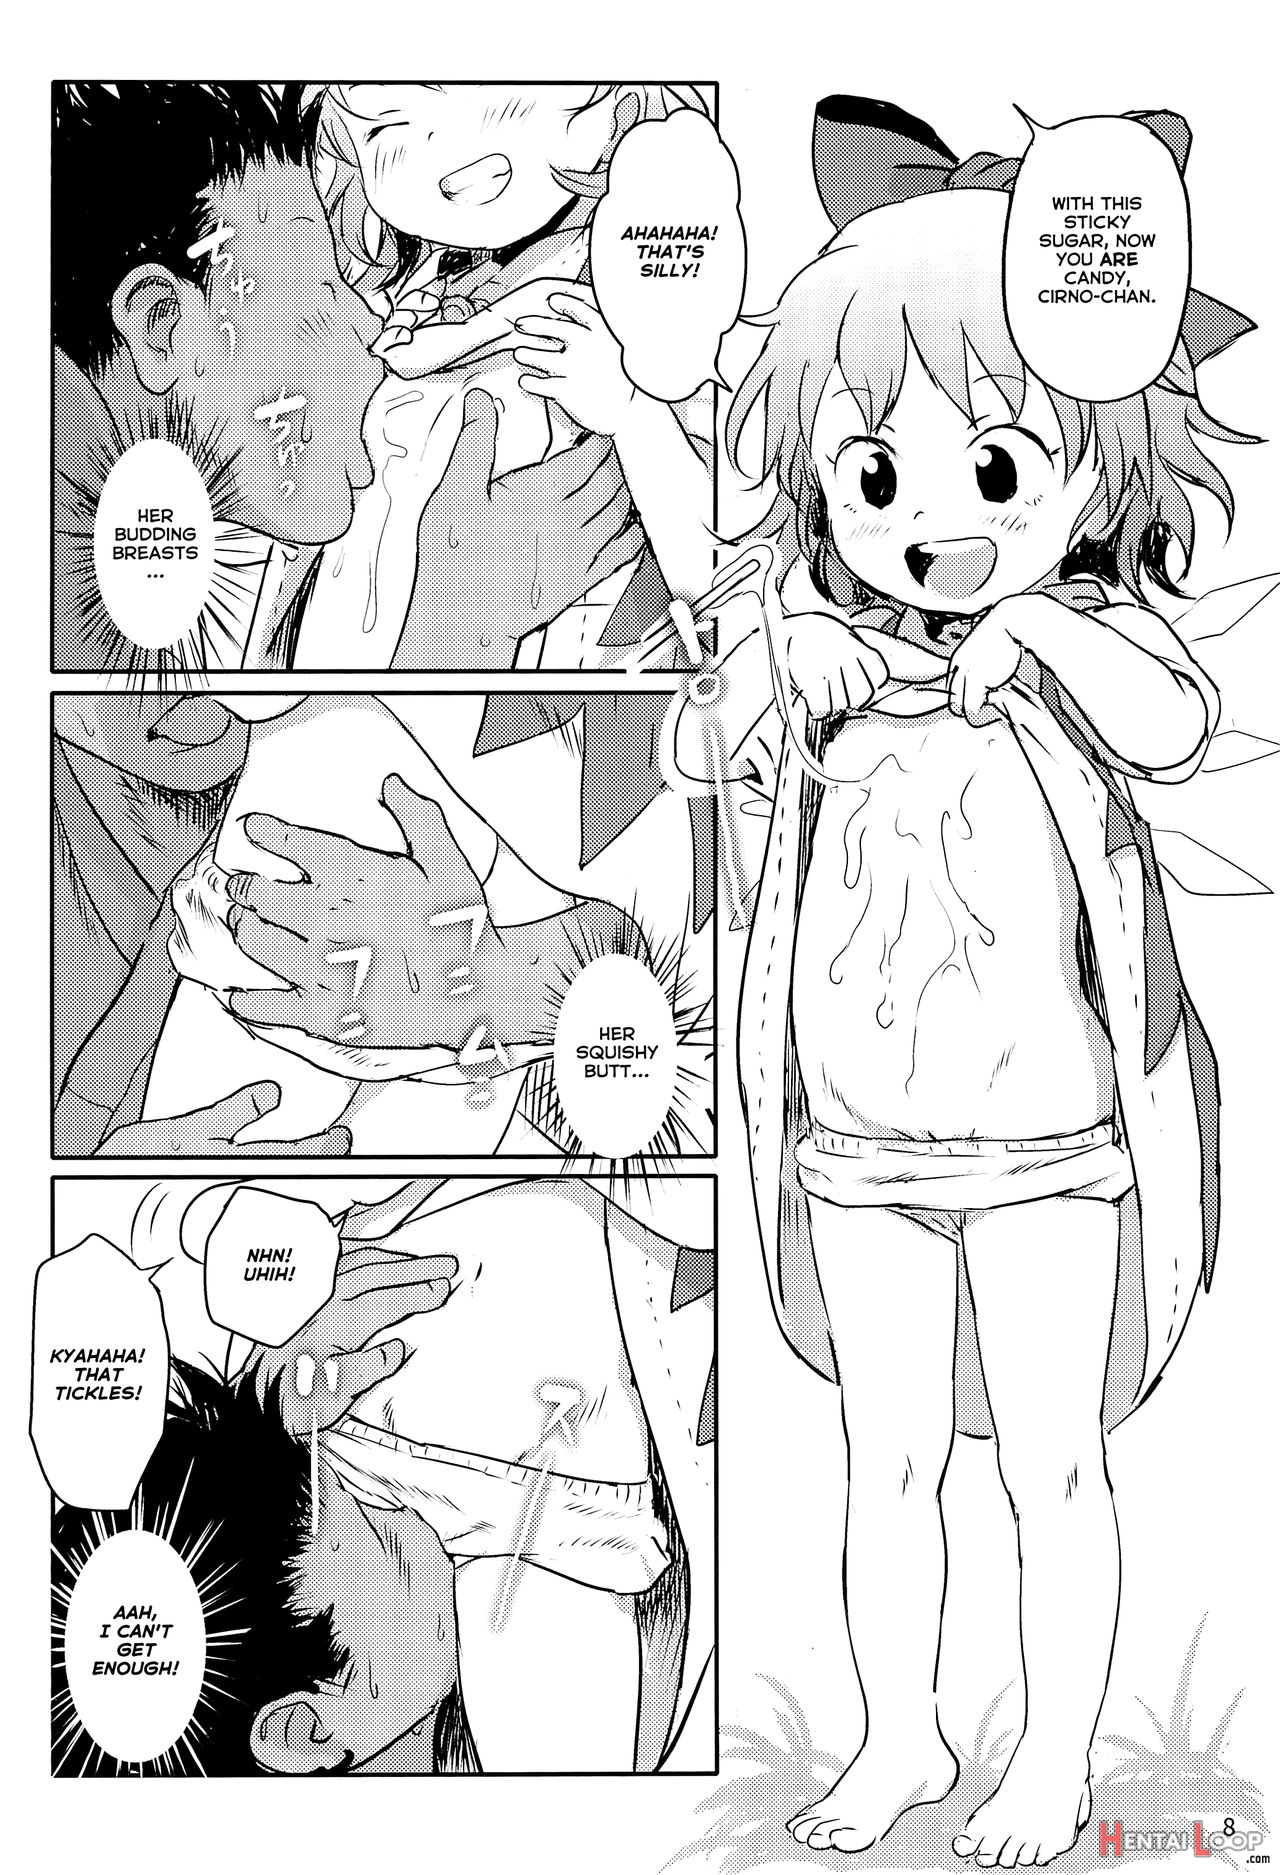 You're Amazing, Cirno-chan! page 7